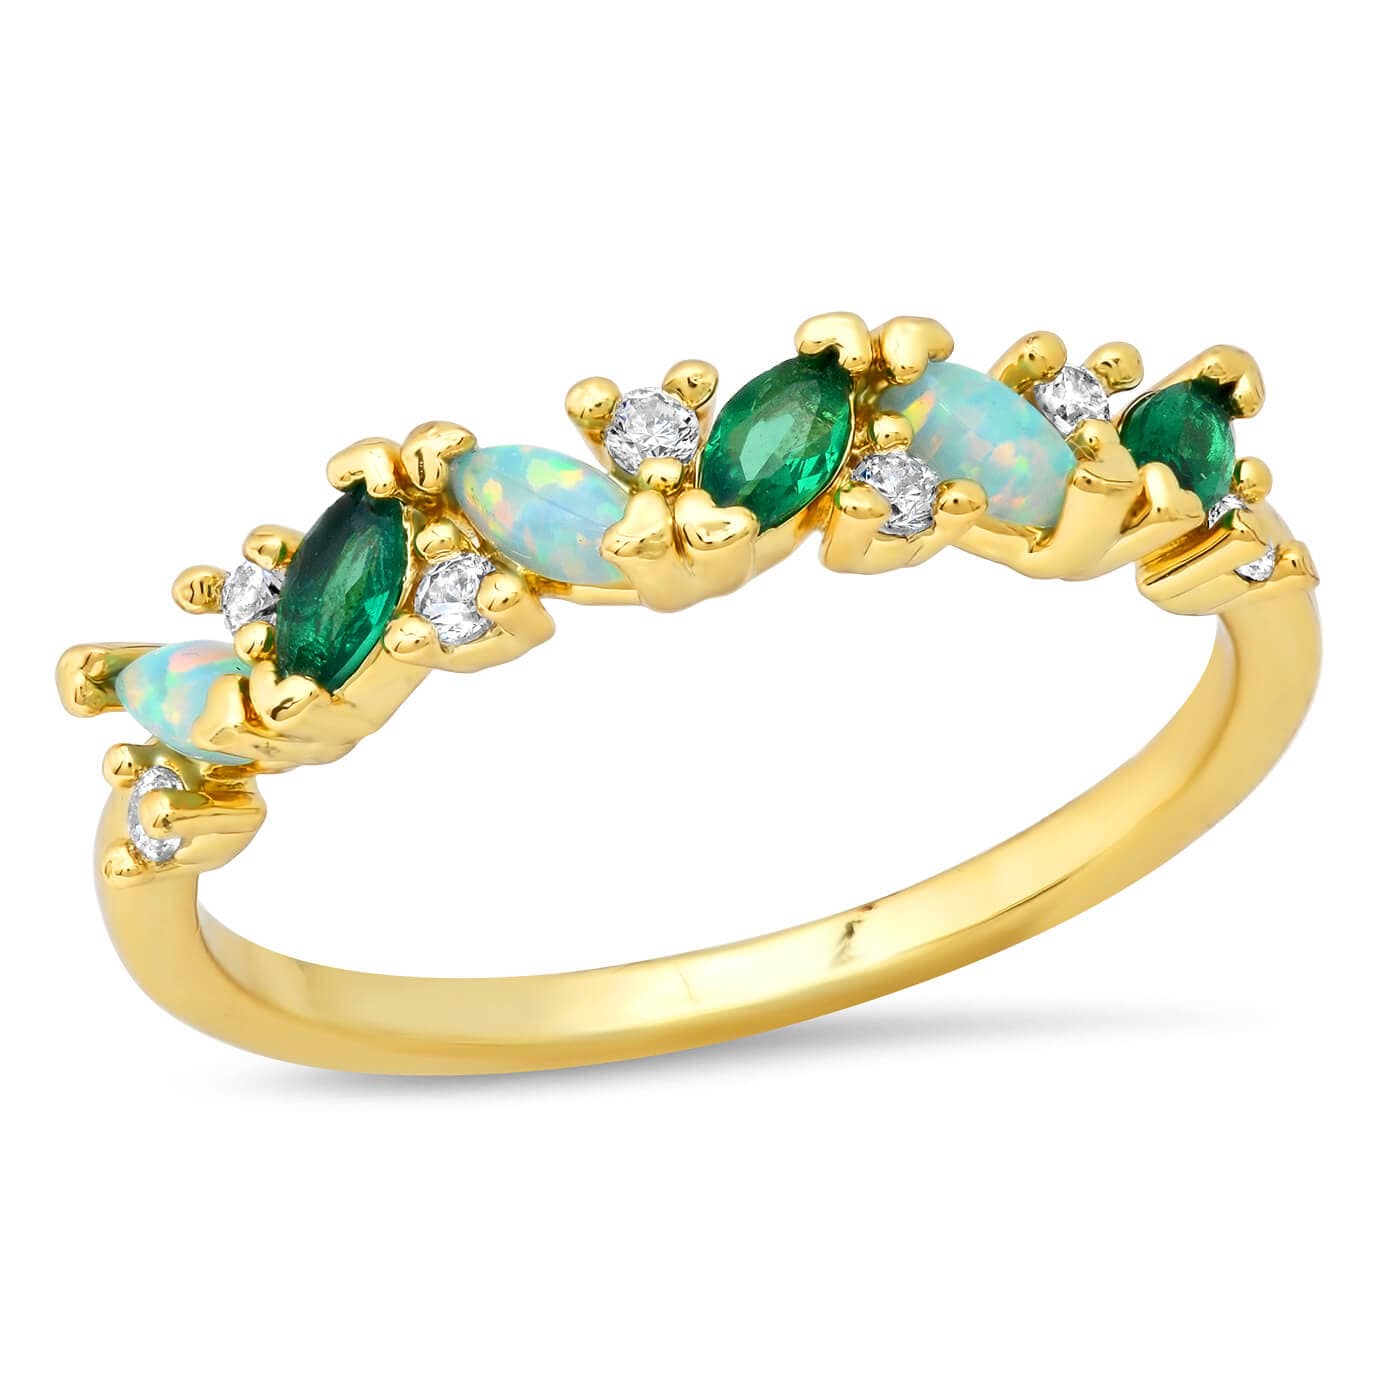 TAI JEWELRY Rings Green Marquis Stone Band Ring